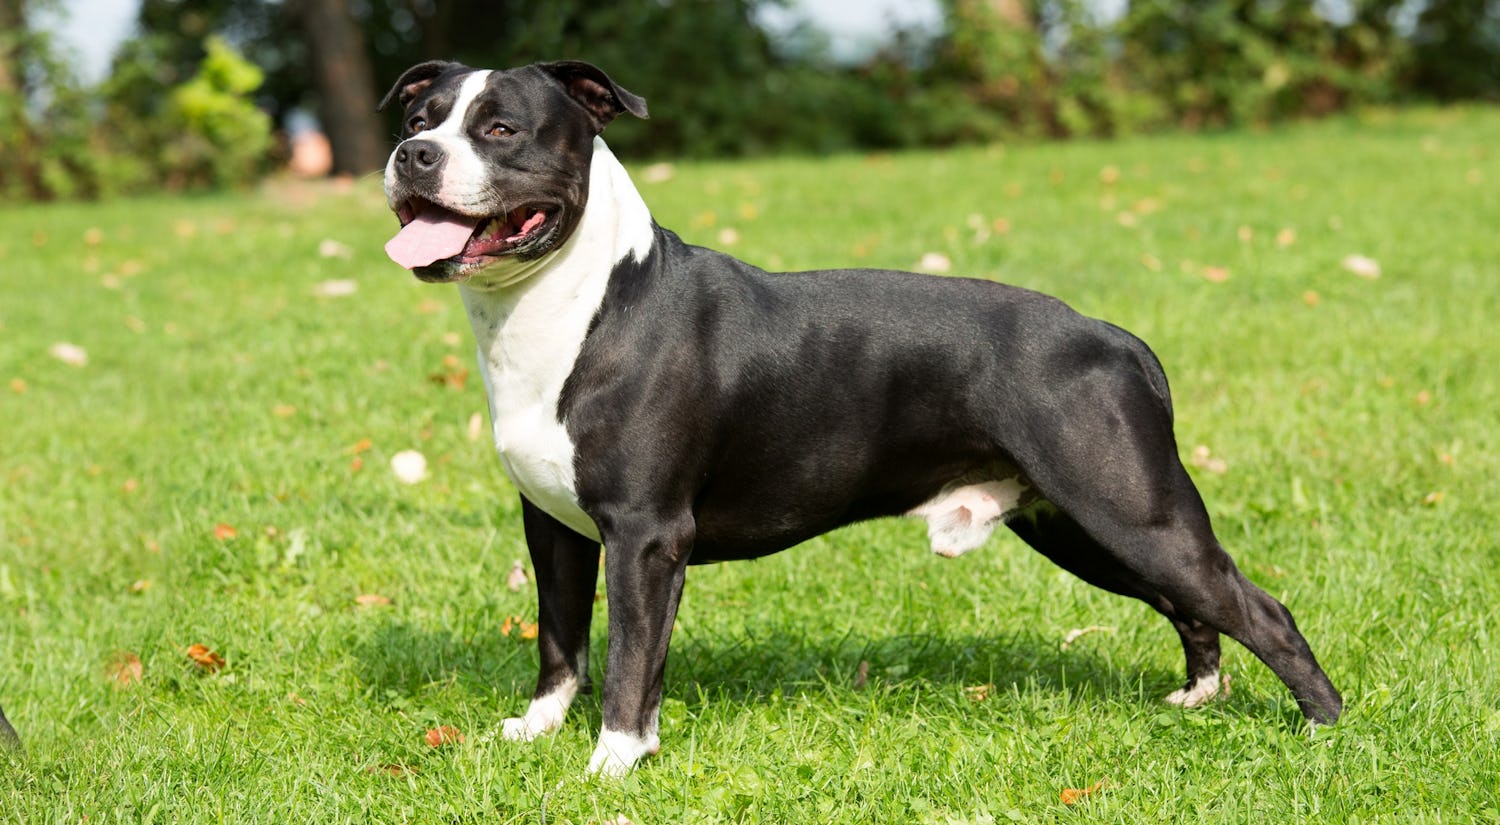 Secondary image of American Staffordshire Terrier dog breed